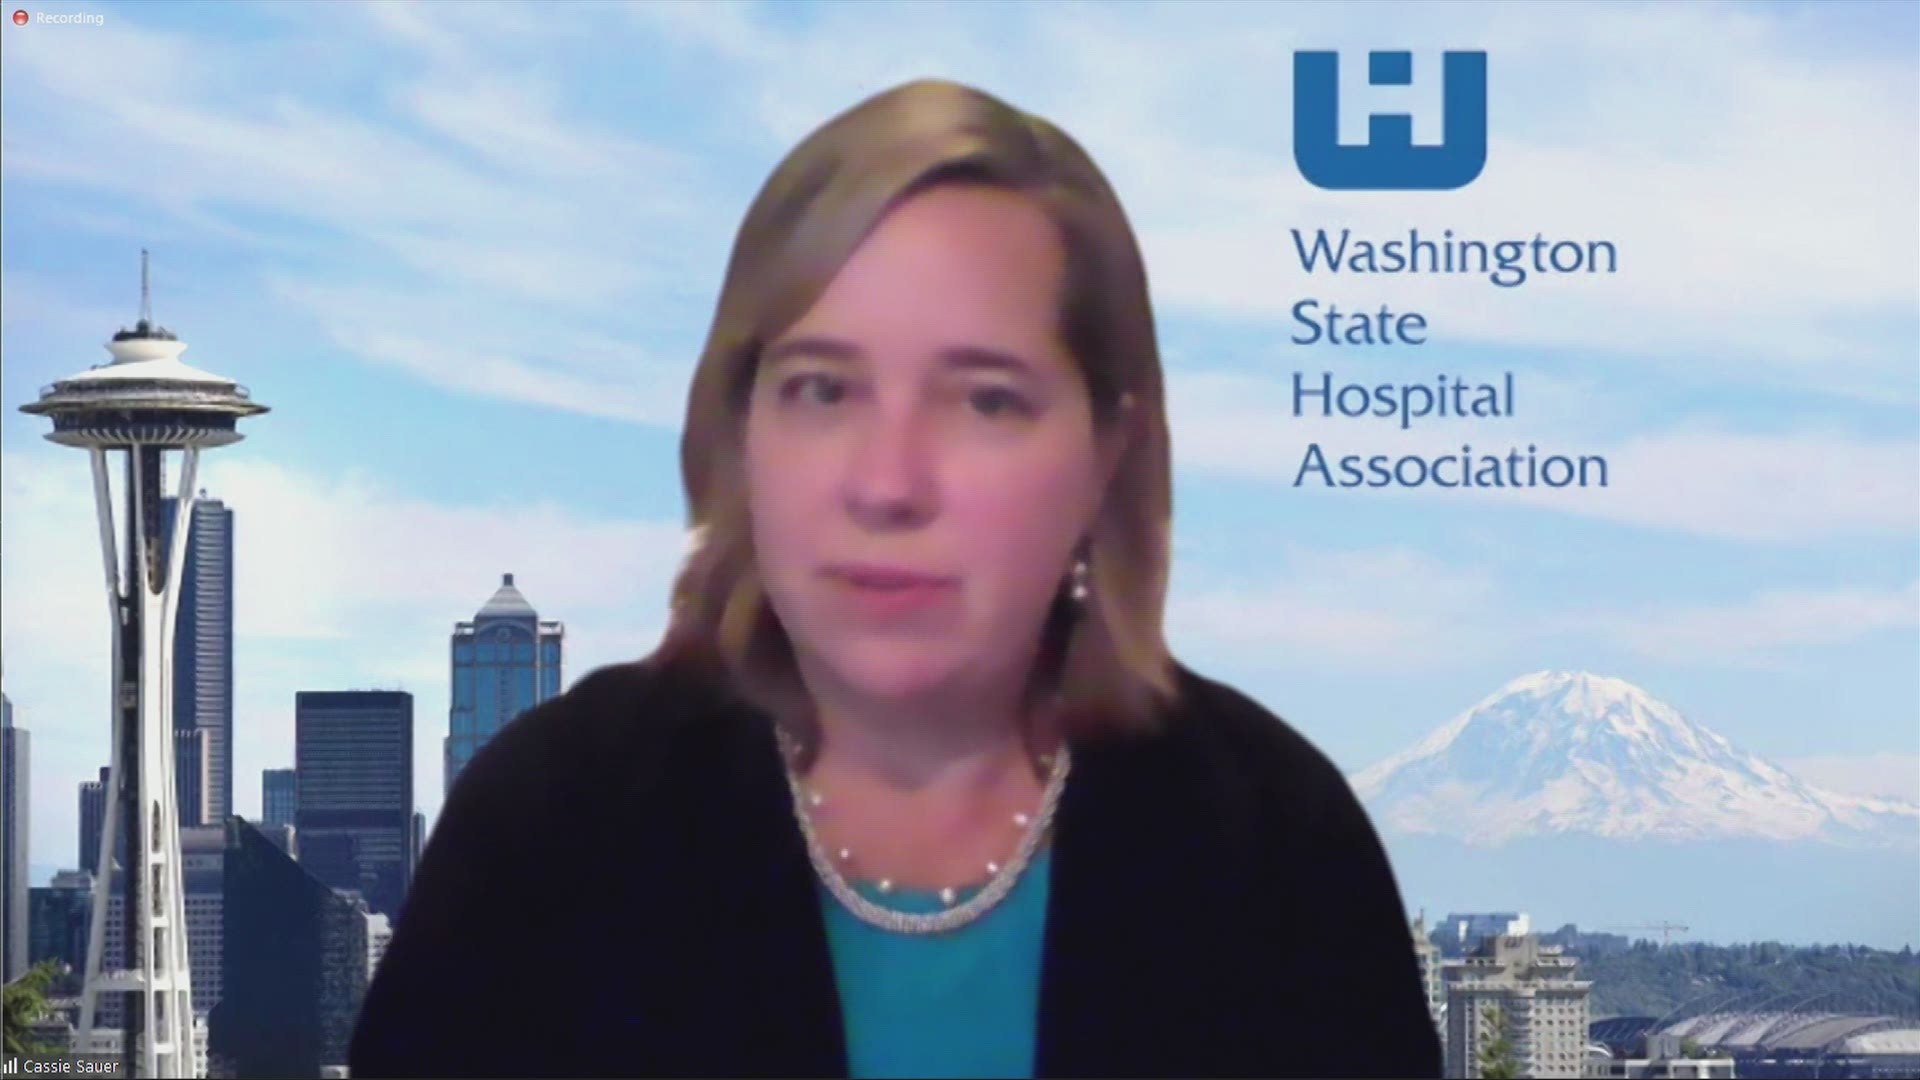 Washington State Hospital Association CEO Cassie Sauer discusses the status of the health care system on April 26, 2021.